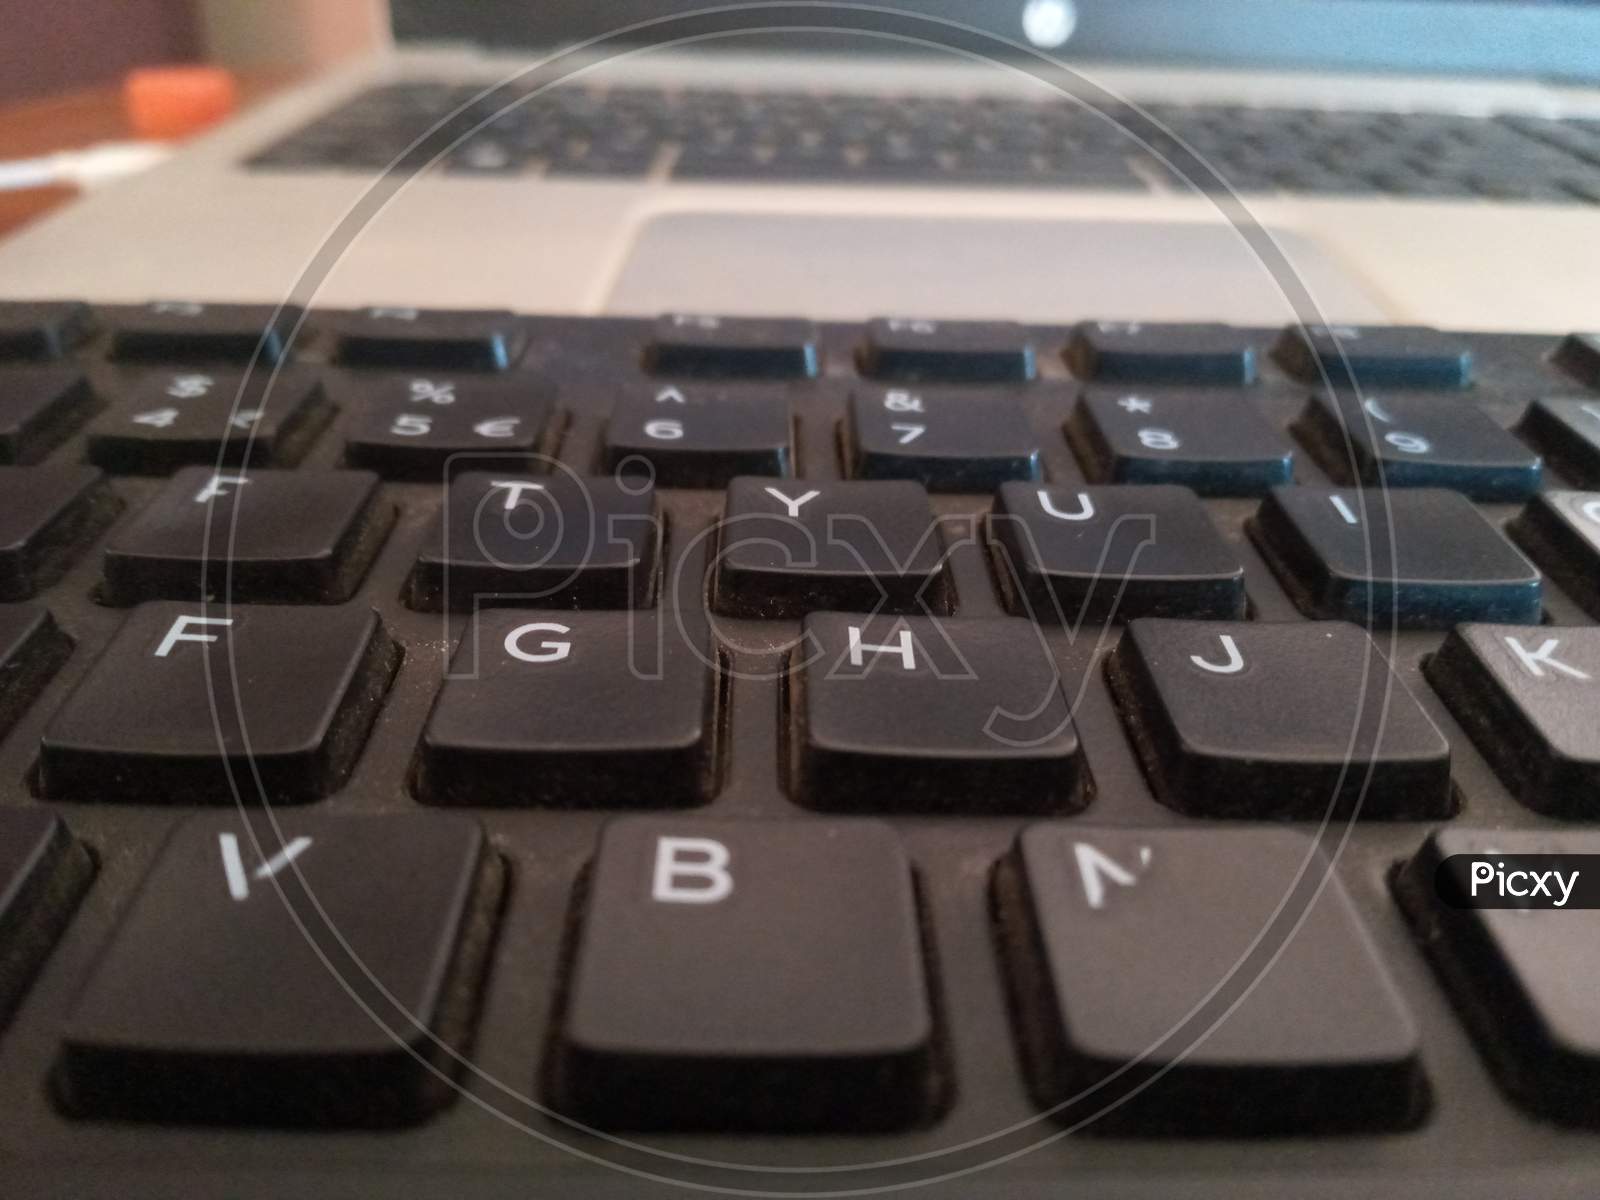 My laptop and keyboard